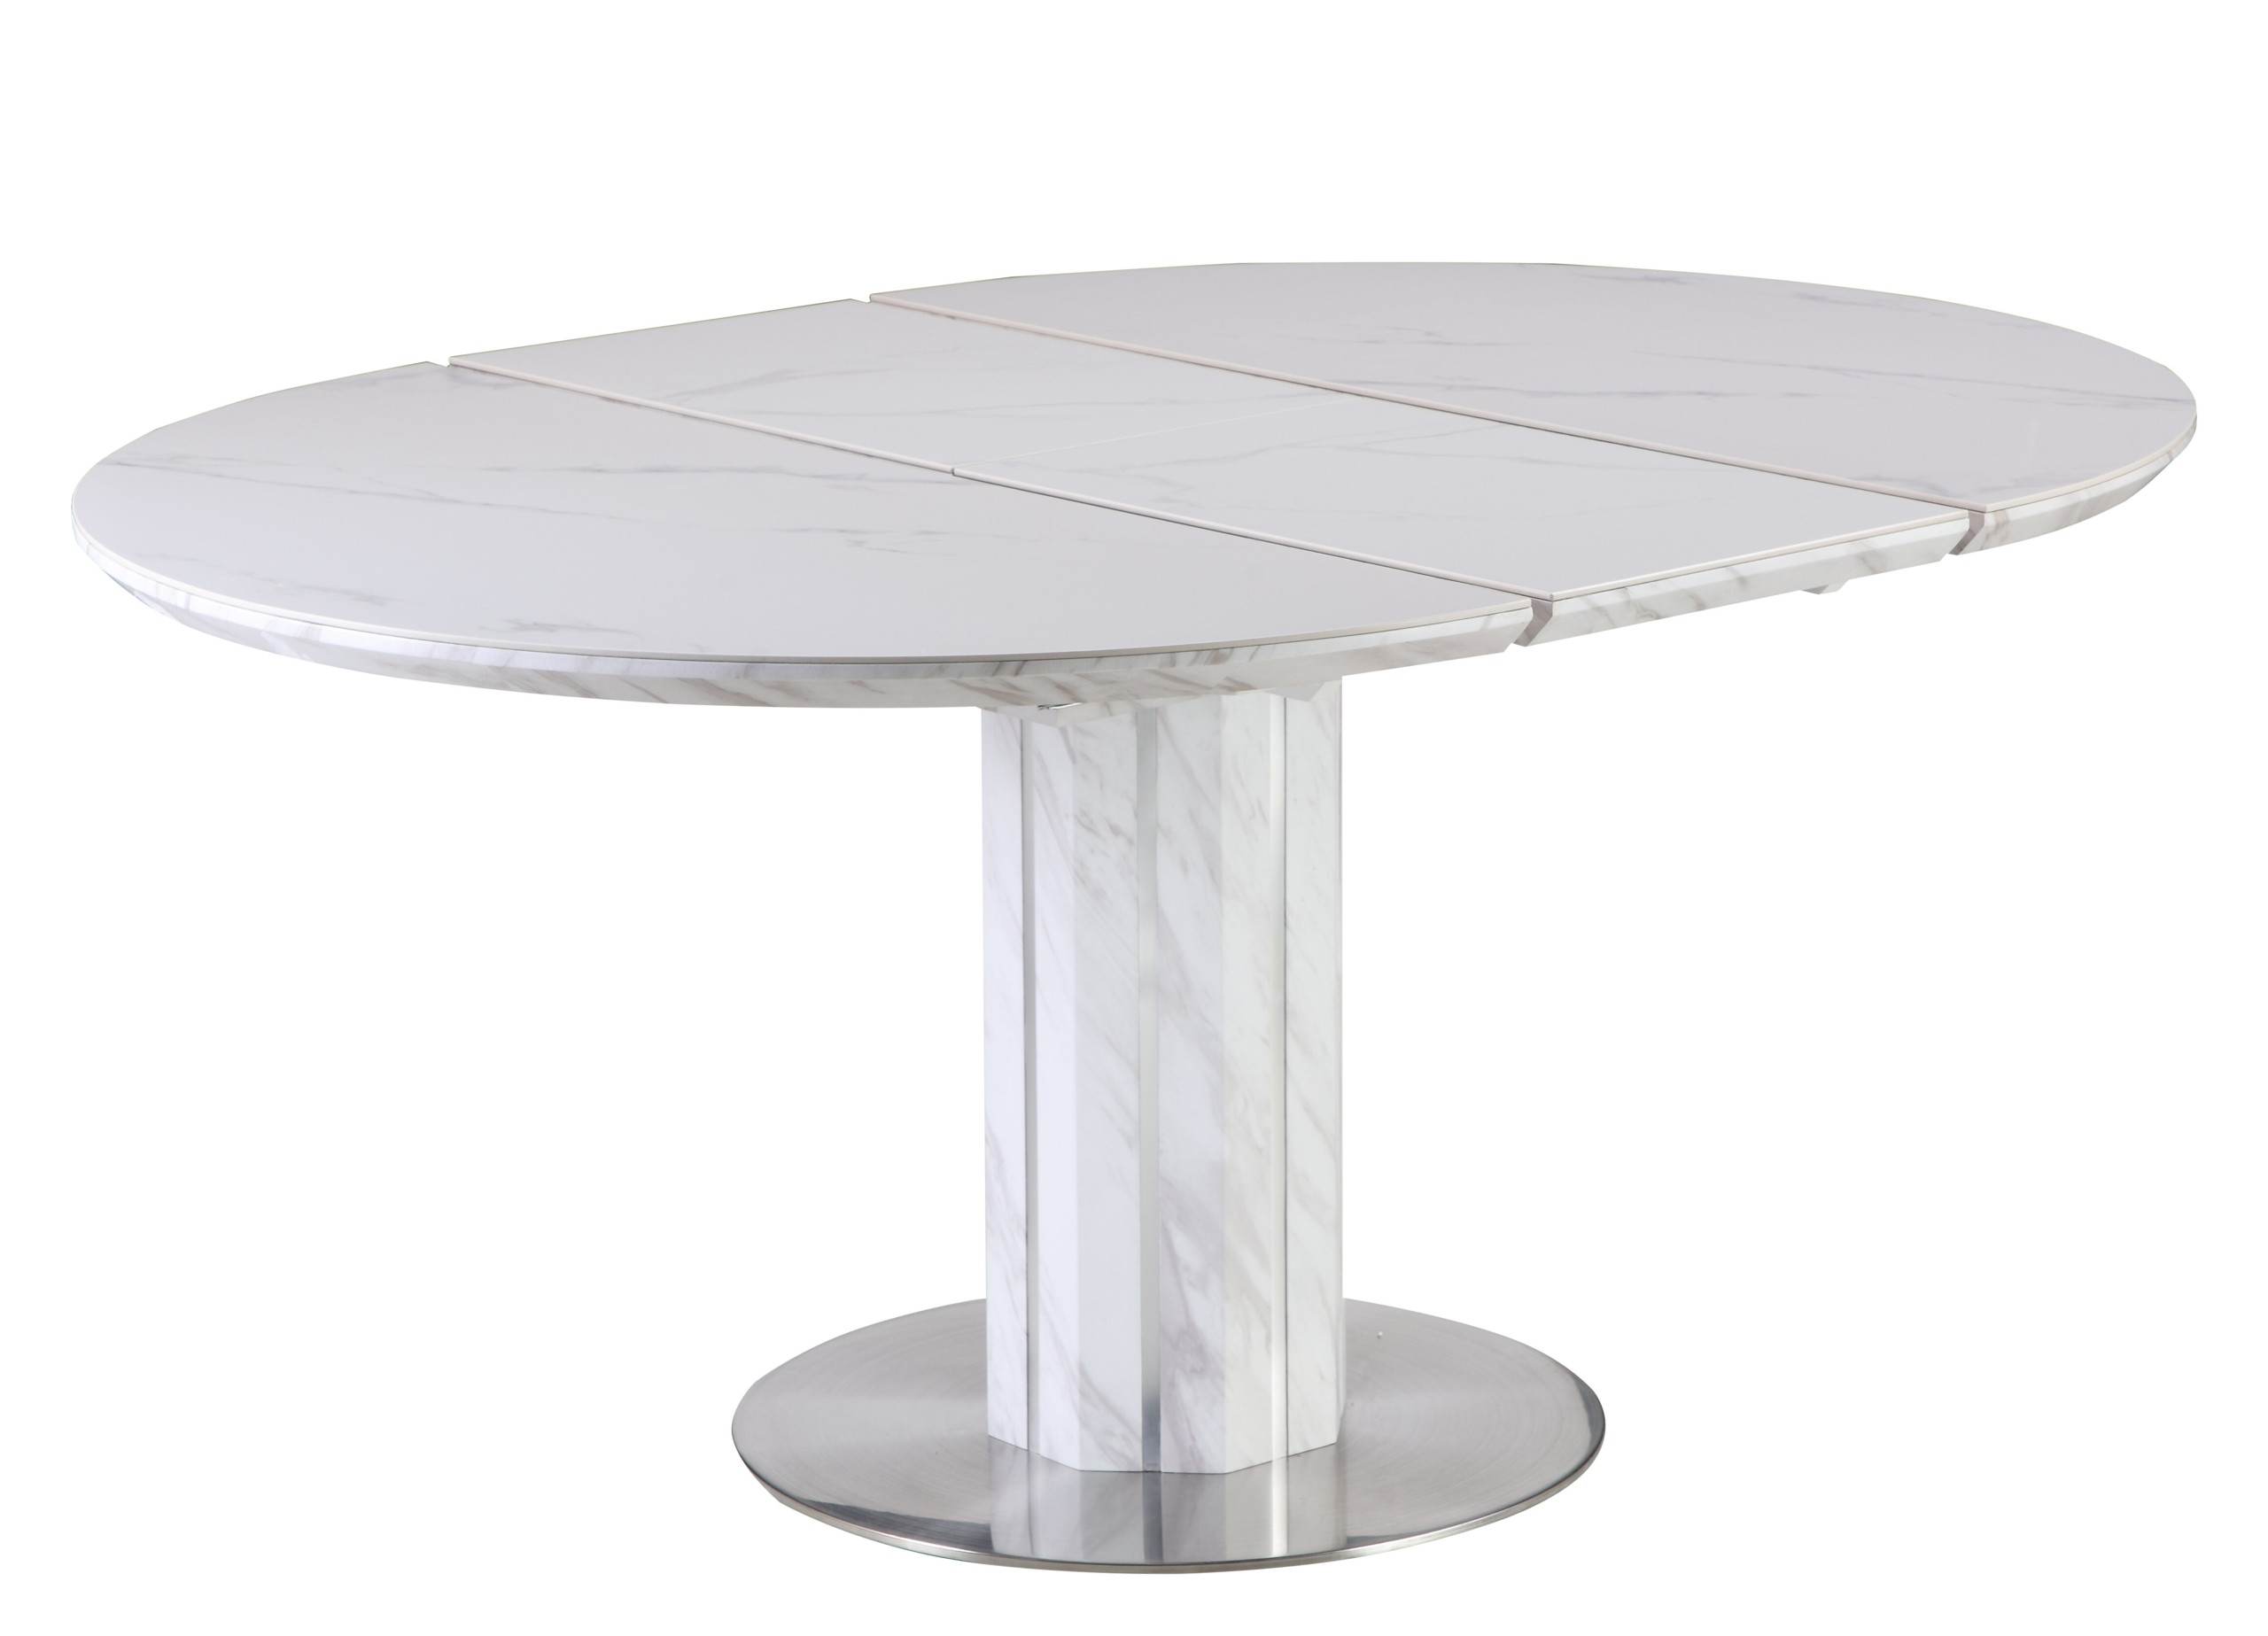 Blairsville Butterfly Leaf Dining Table